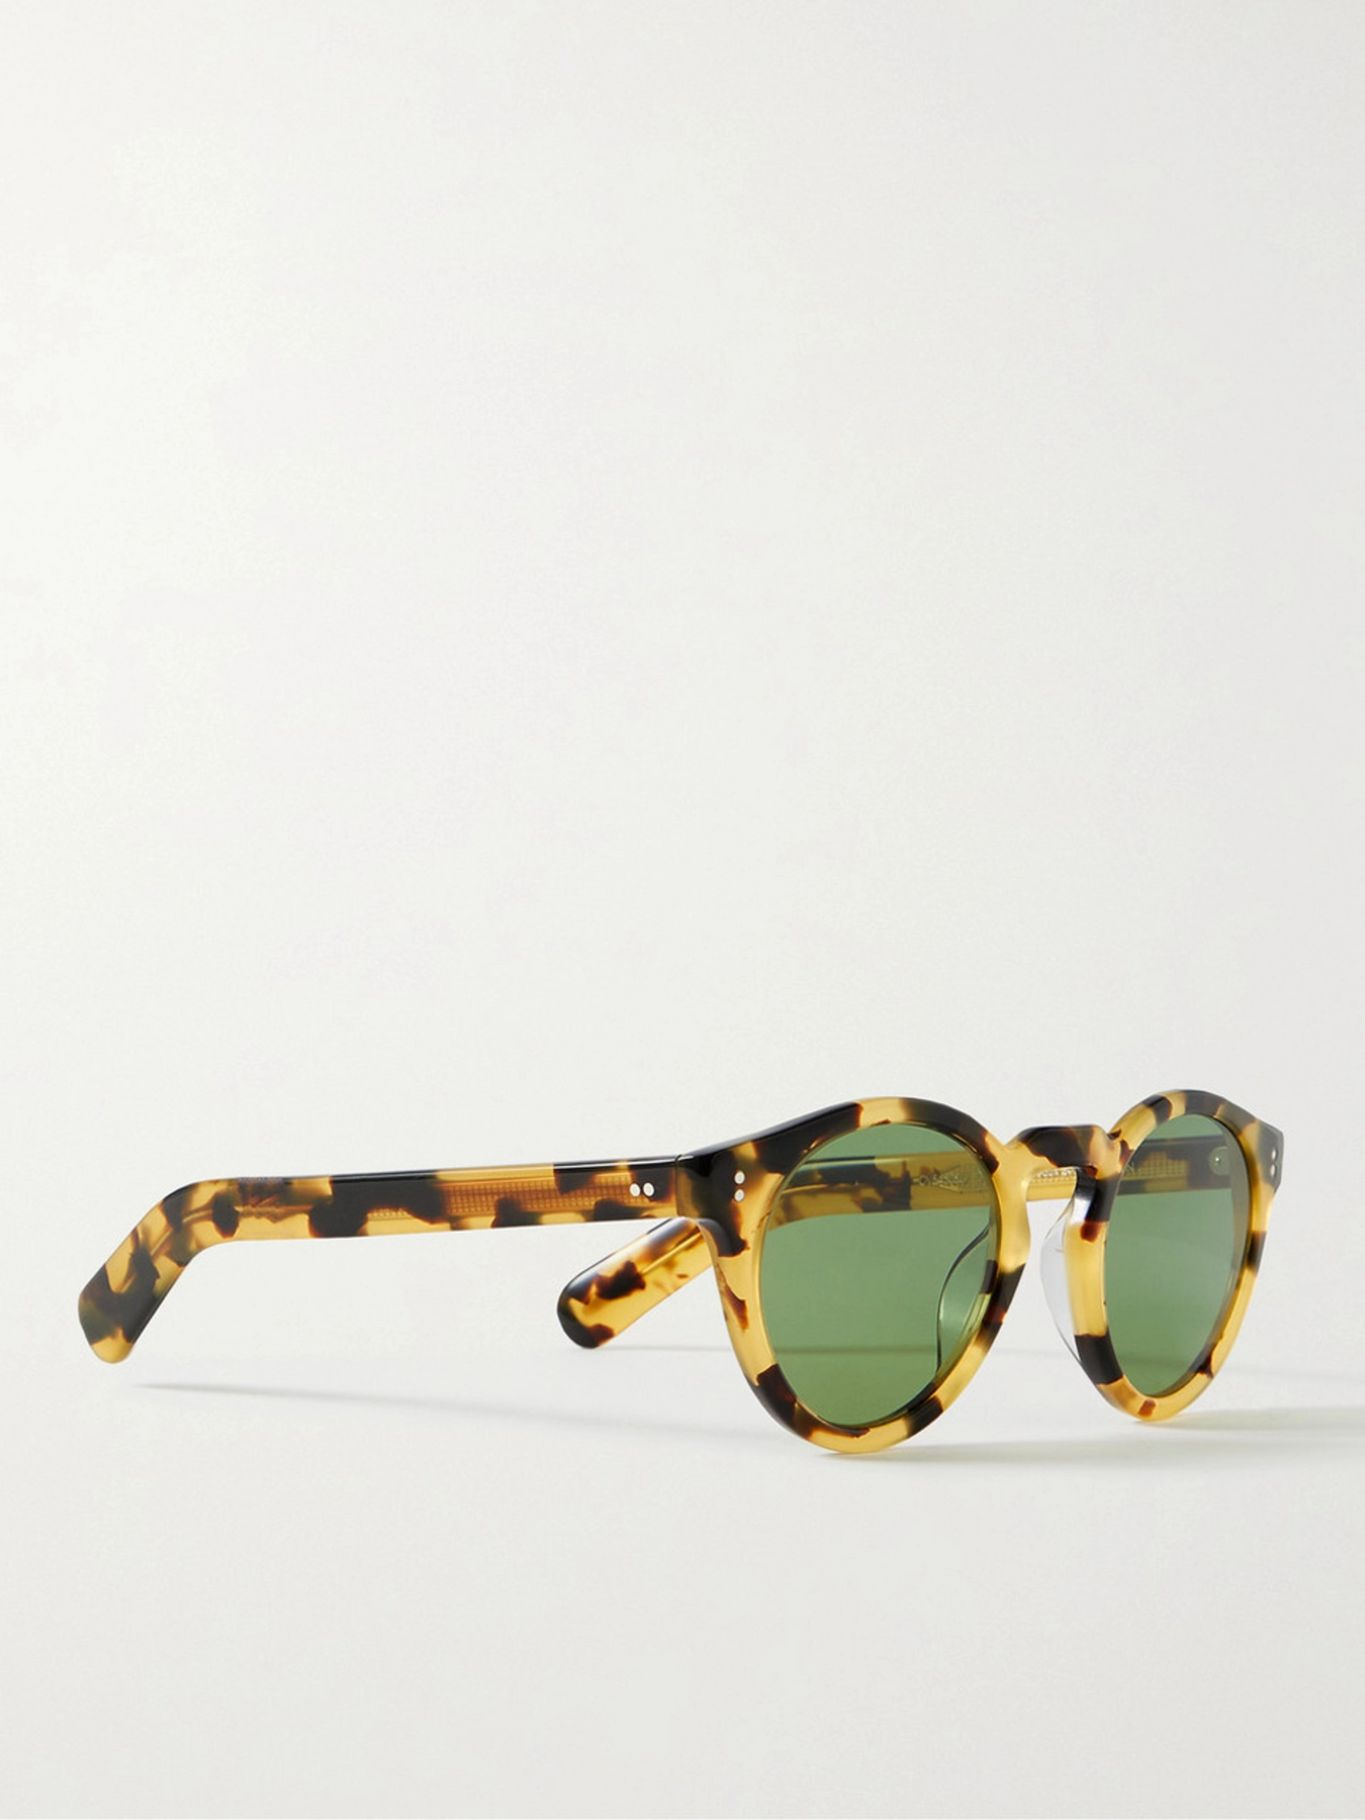 Oliver Peoples Martineaux round sunglasses in brown and tortoiseshell yellow, green